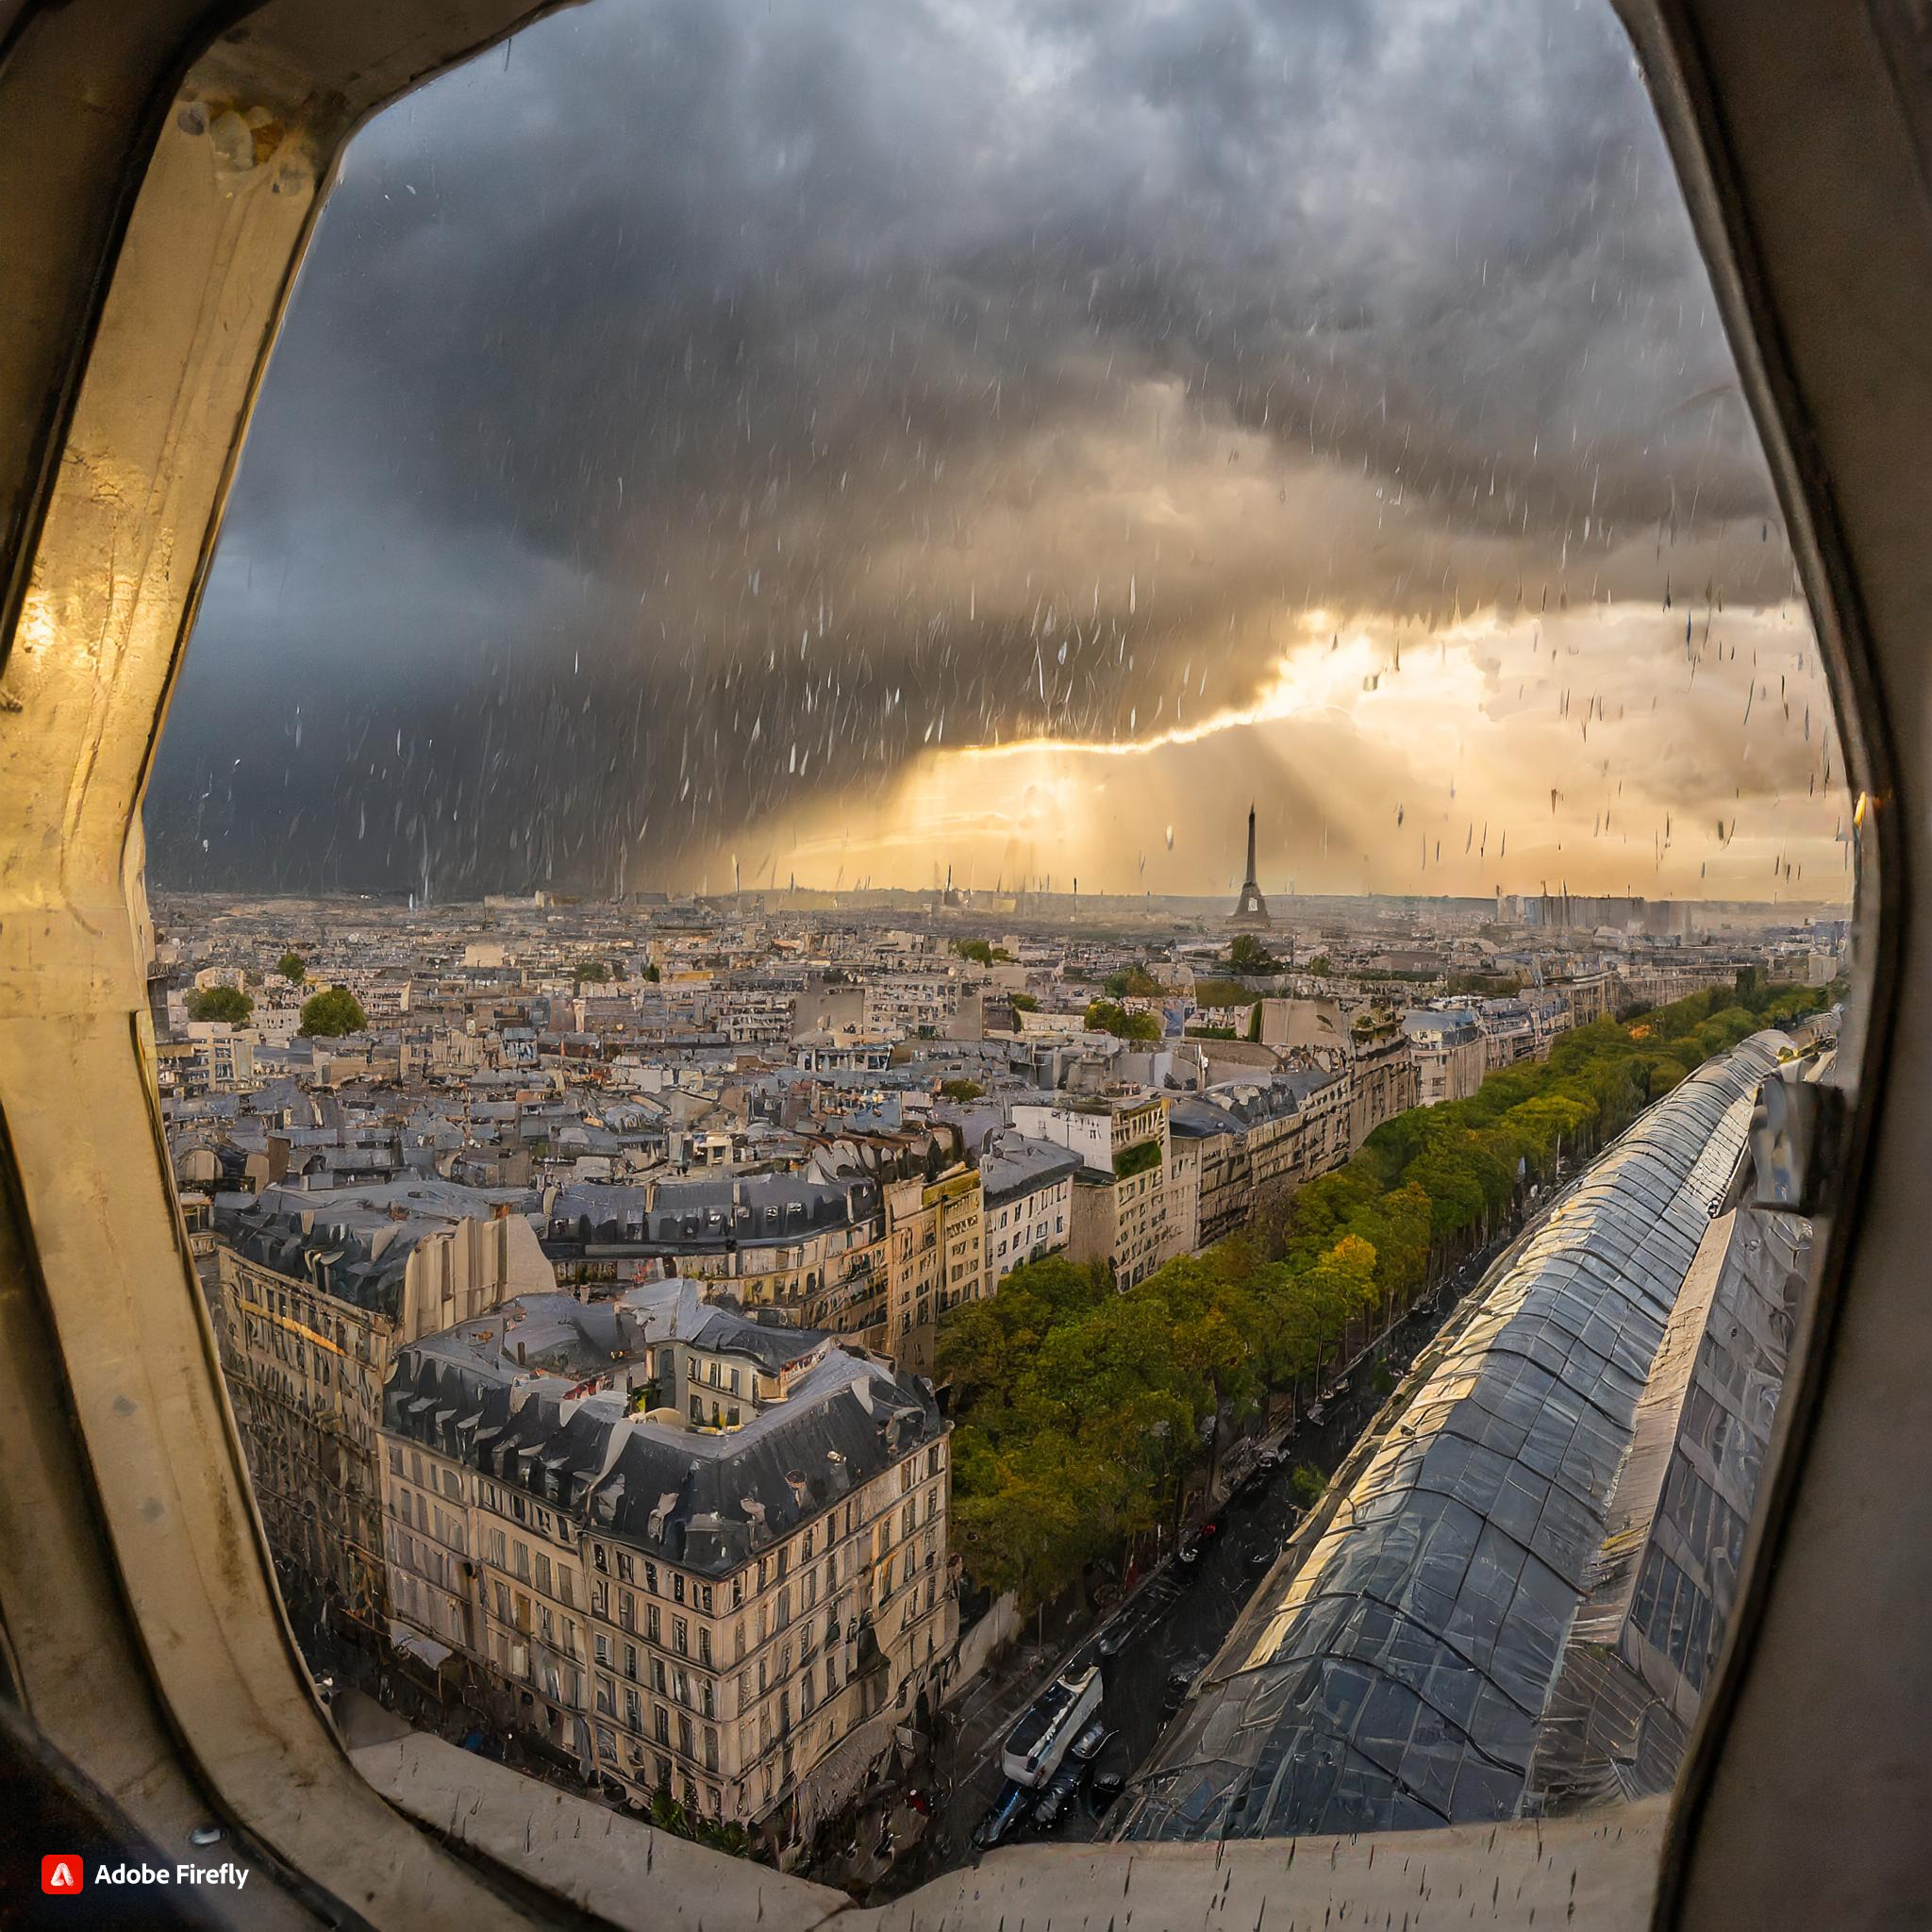 Firefly looking out over paris through a skylight, sun setting, eiffel tower, rain clouds coming in